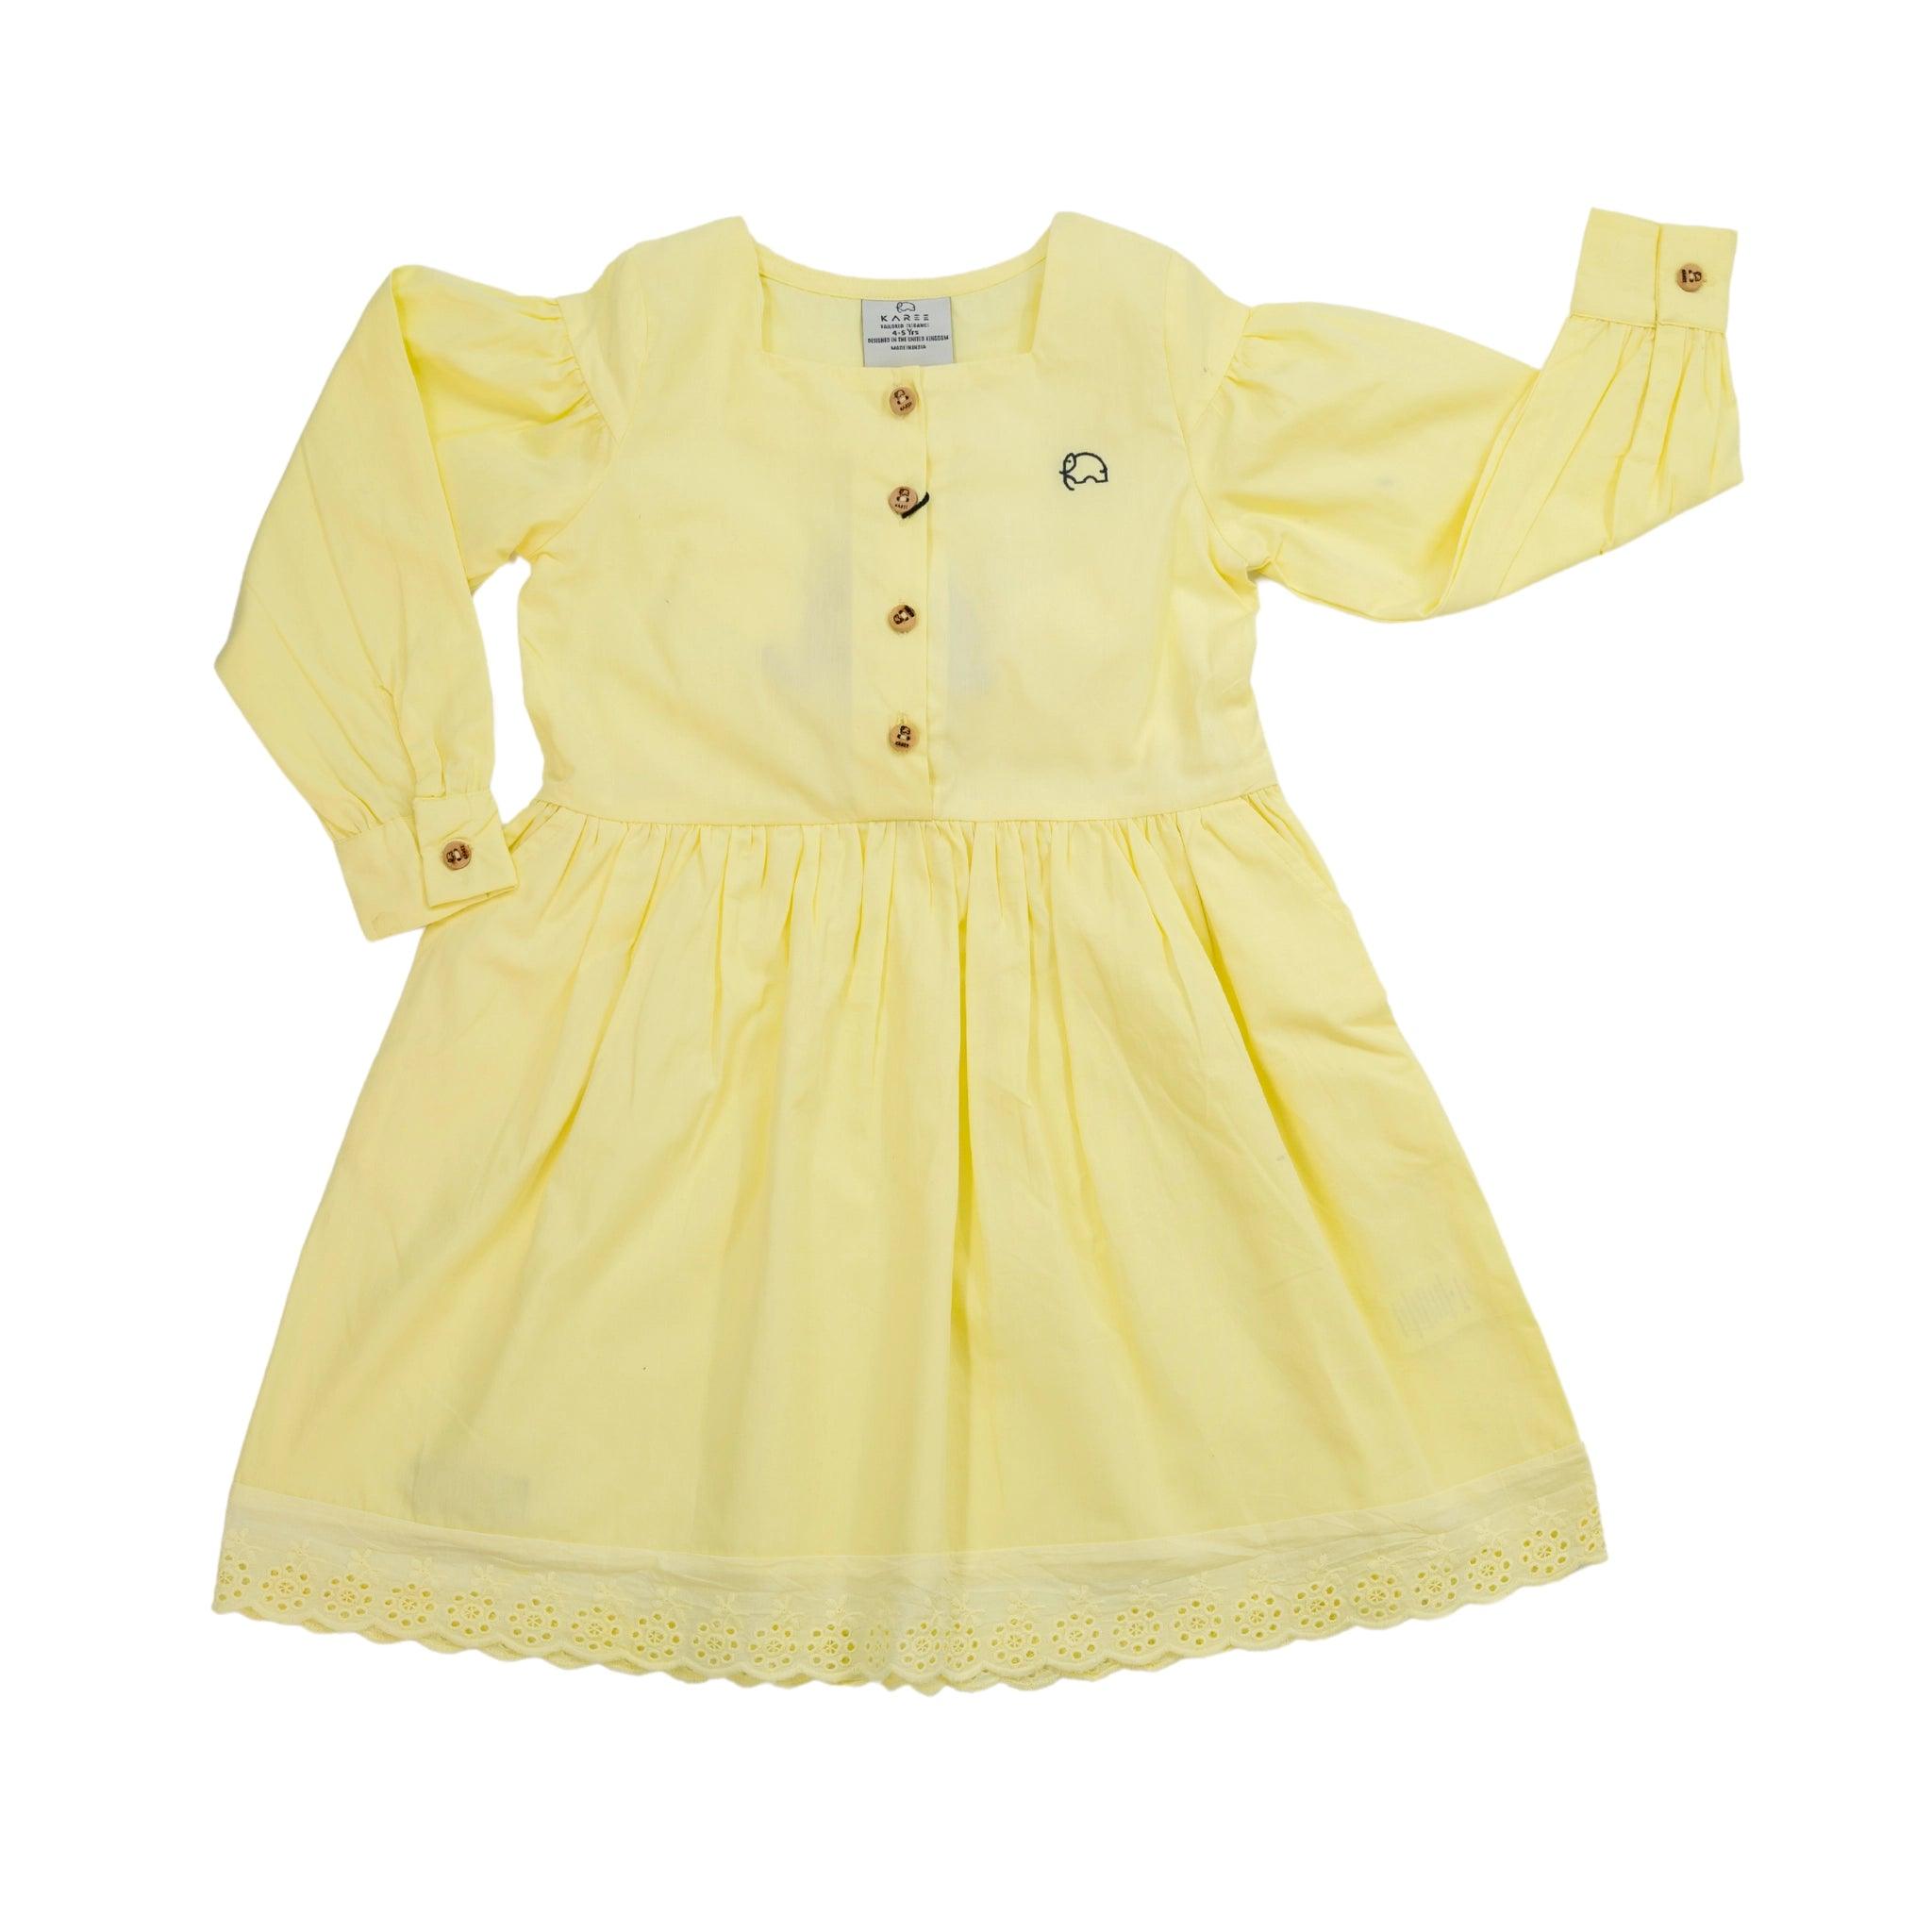 An elegant Karee yellow long puff sleeve cotton dress with lace and buttons, combining comfort and elegance.